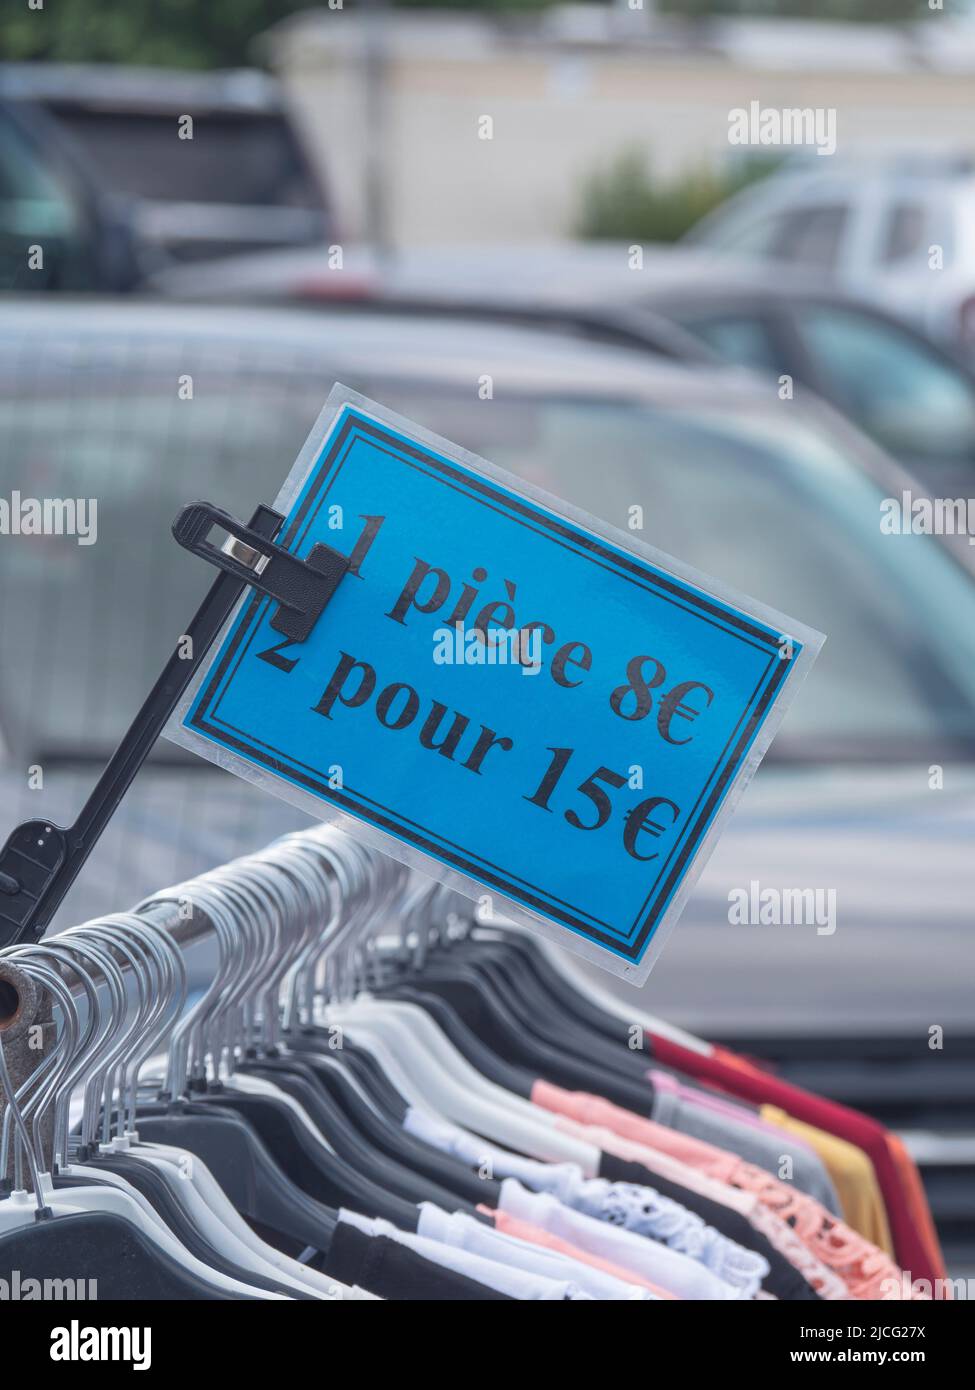 blue price tag on a clothes rack at a market showing the price per piece, 1 piece 8 euros and in French it says 2 for 15 euros Stock Photo